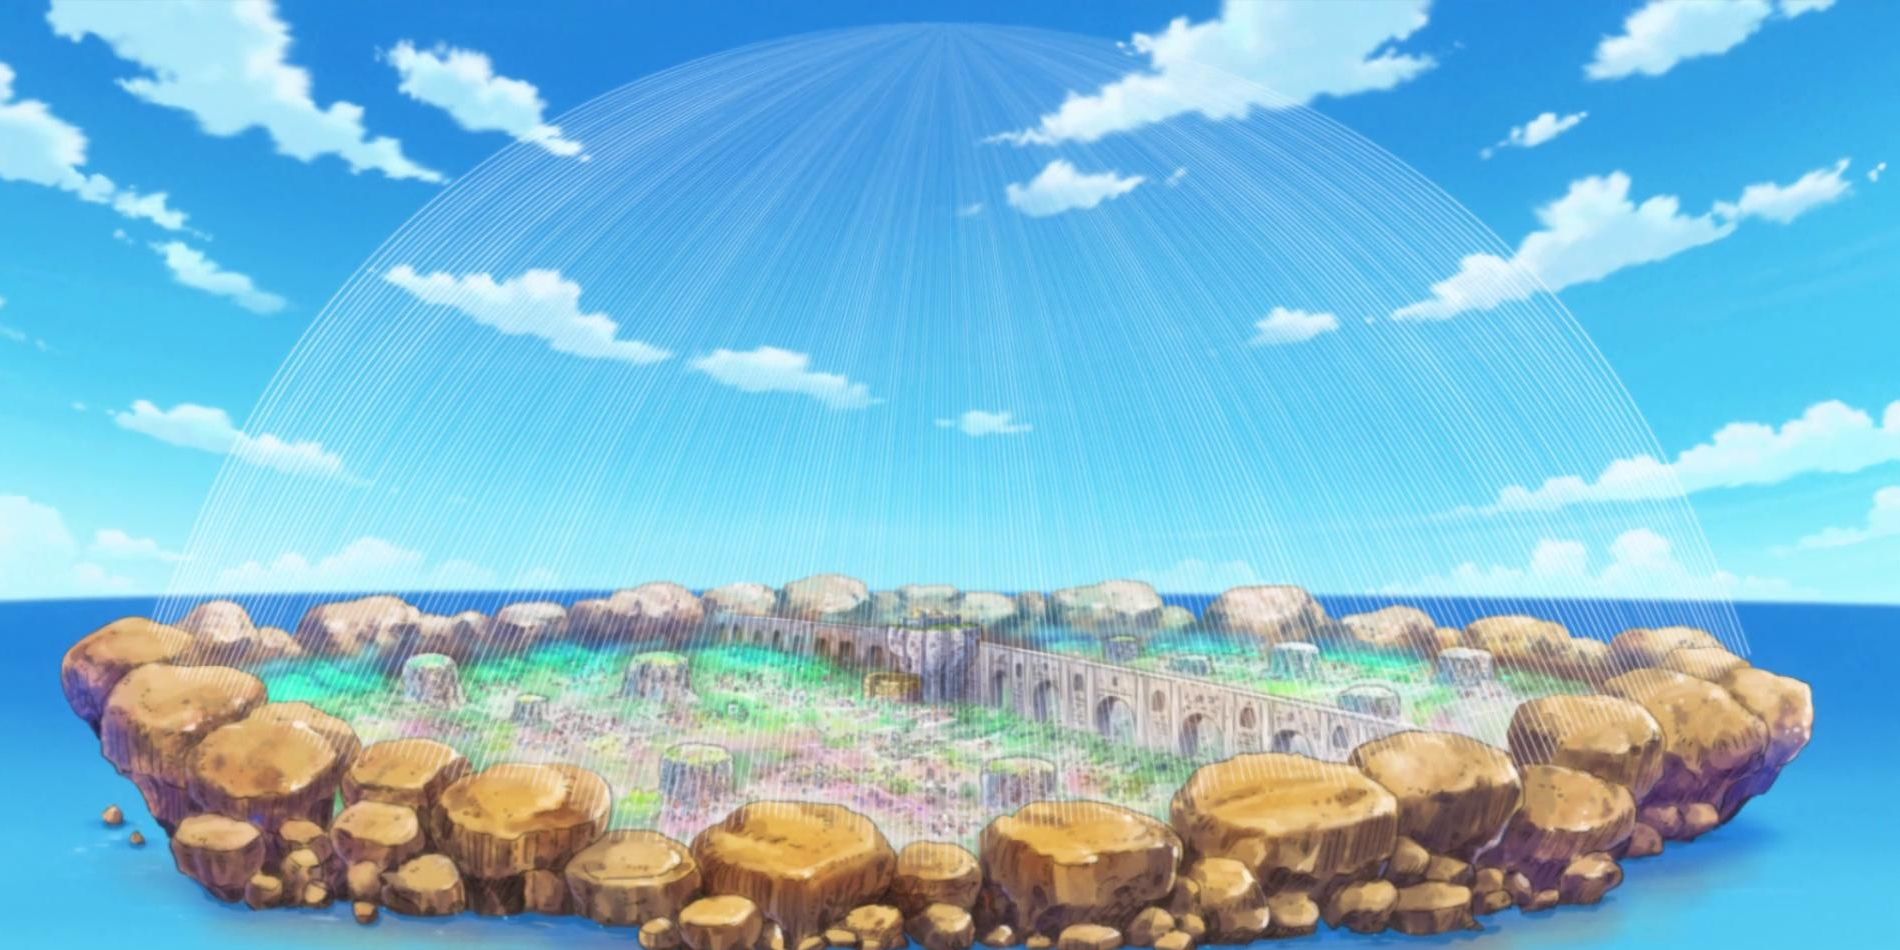 dressrosa one piece country liberated by luffy